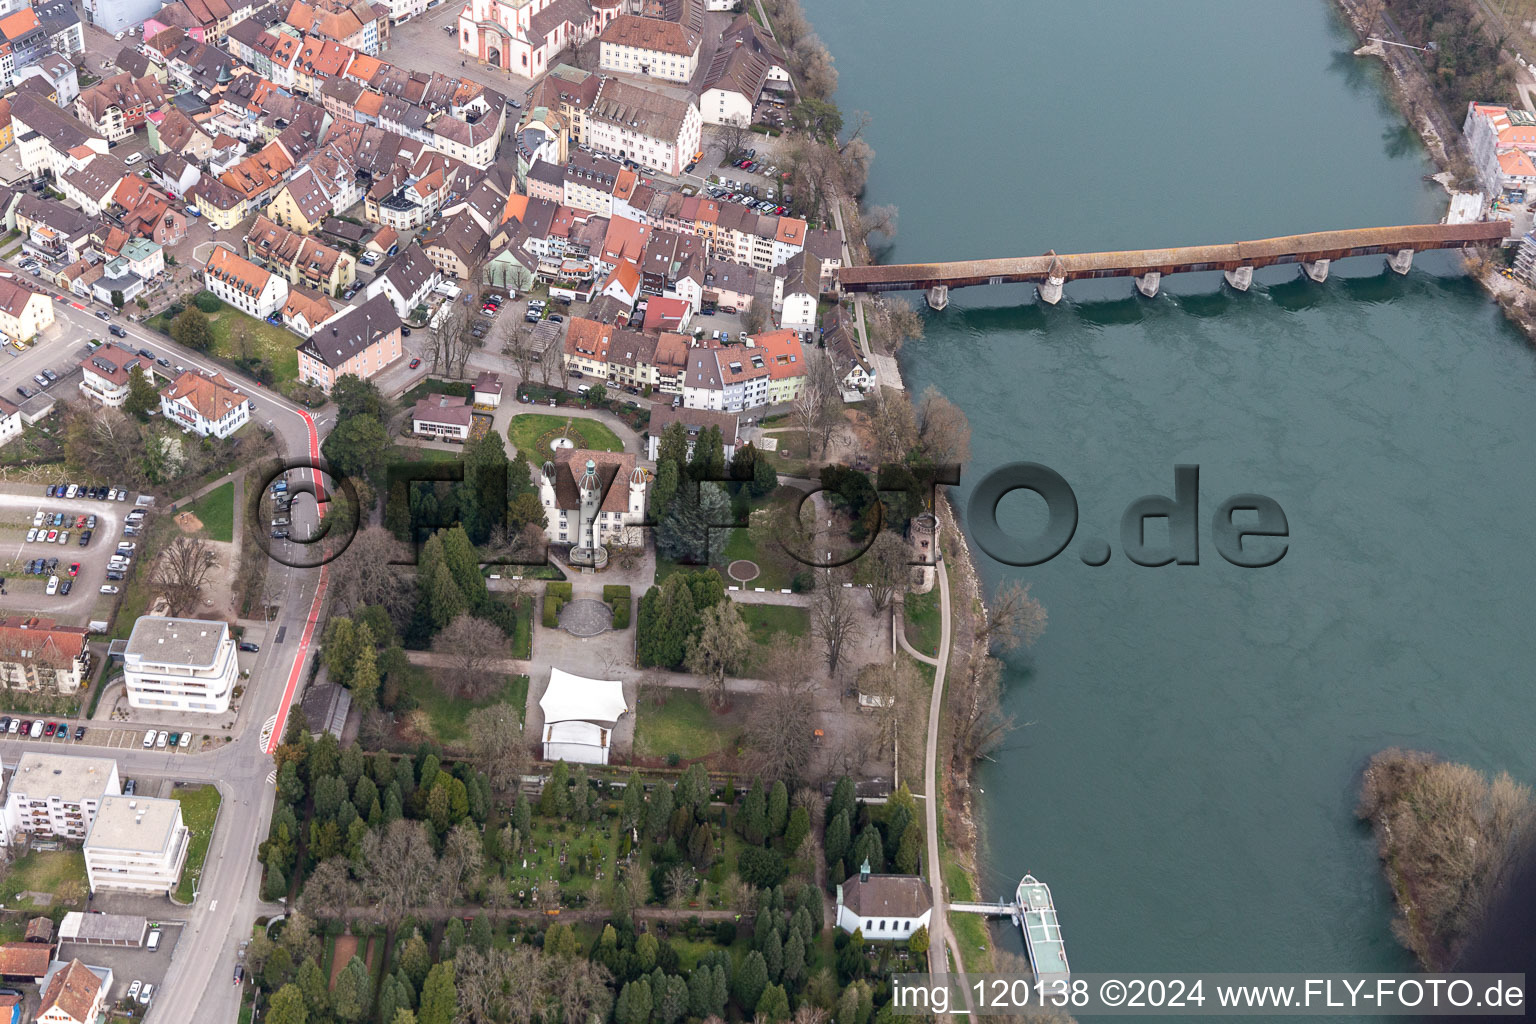 Aerial view of City center with old town and Castle Schoenau and the historic bridge to Switzerland crossing the river Rhine in Bad Saeckingen in the state Baden-Wurttemberg, Germany